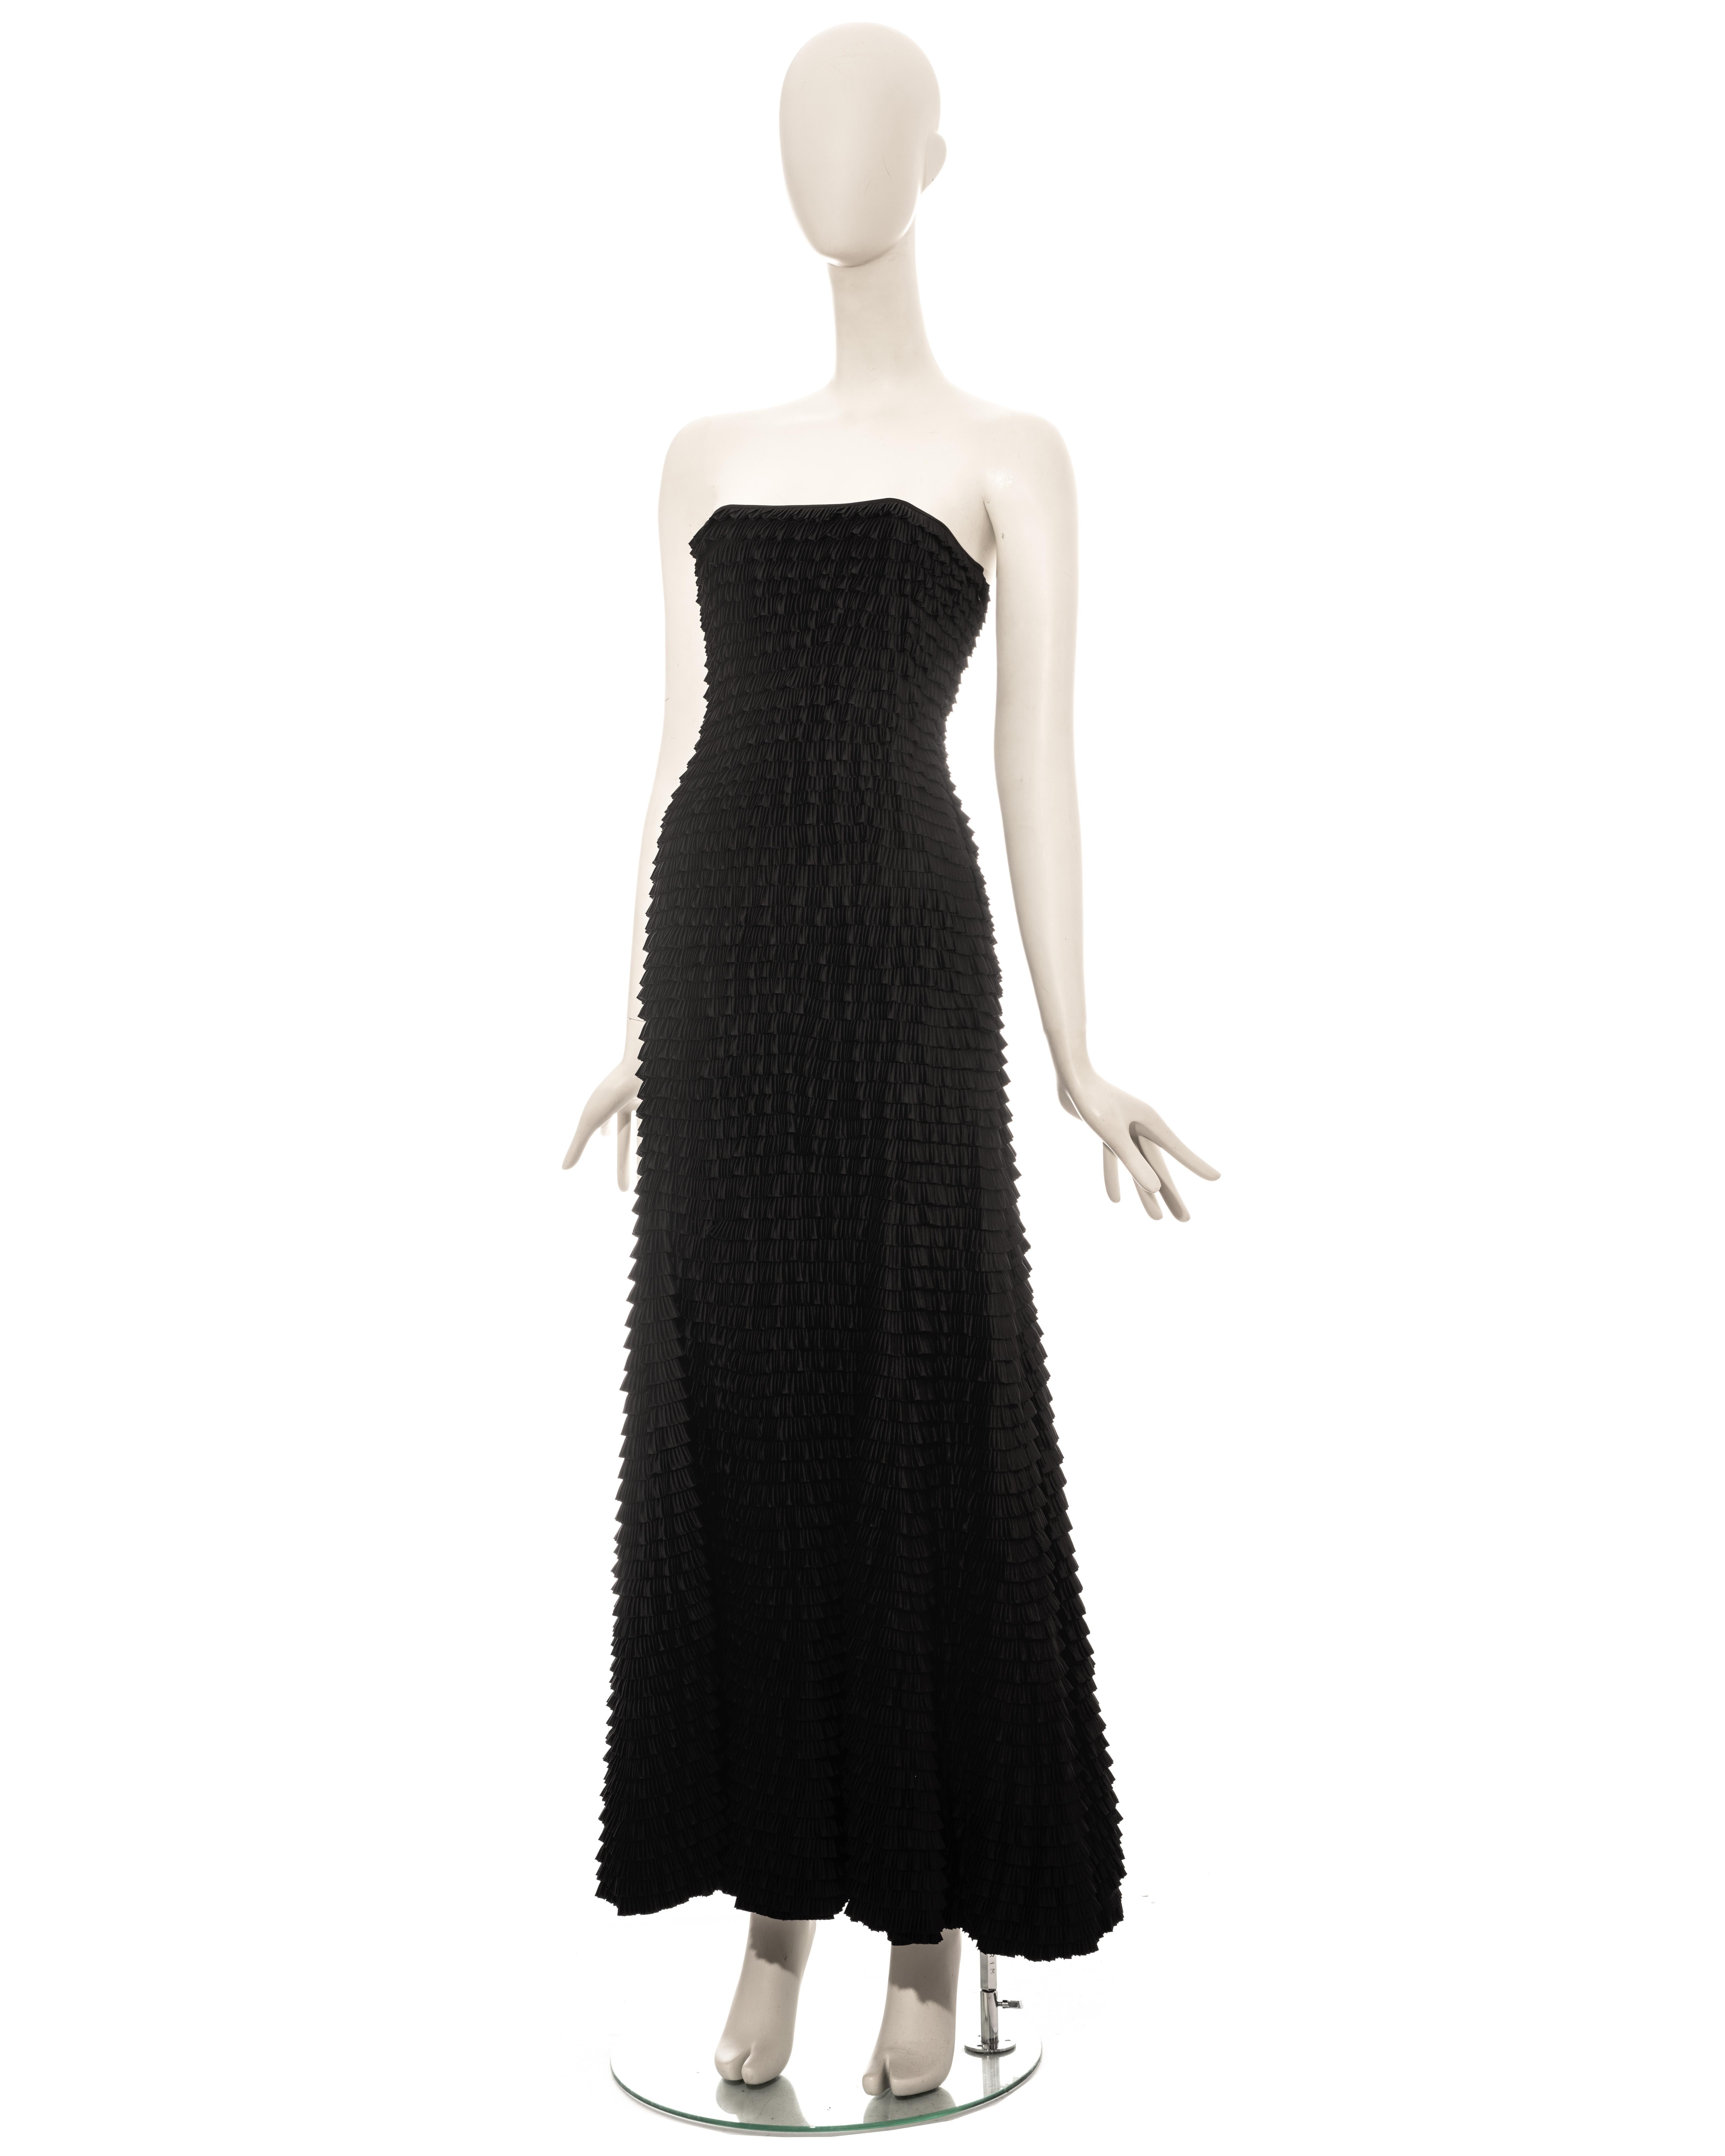 Women's Givenchy by Alexander McQueen black ruffled fishtail evening dress, ss 1999 For Sale